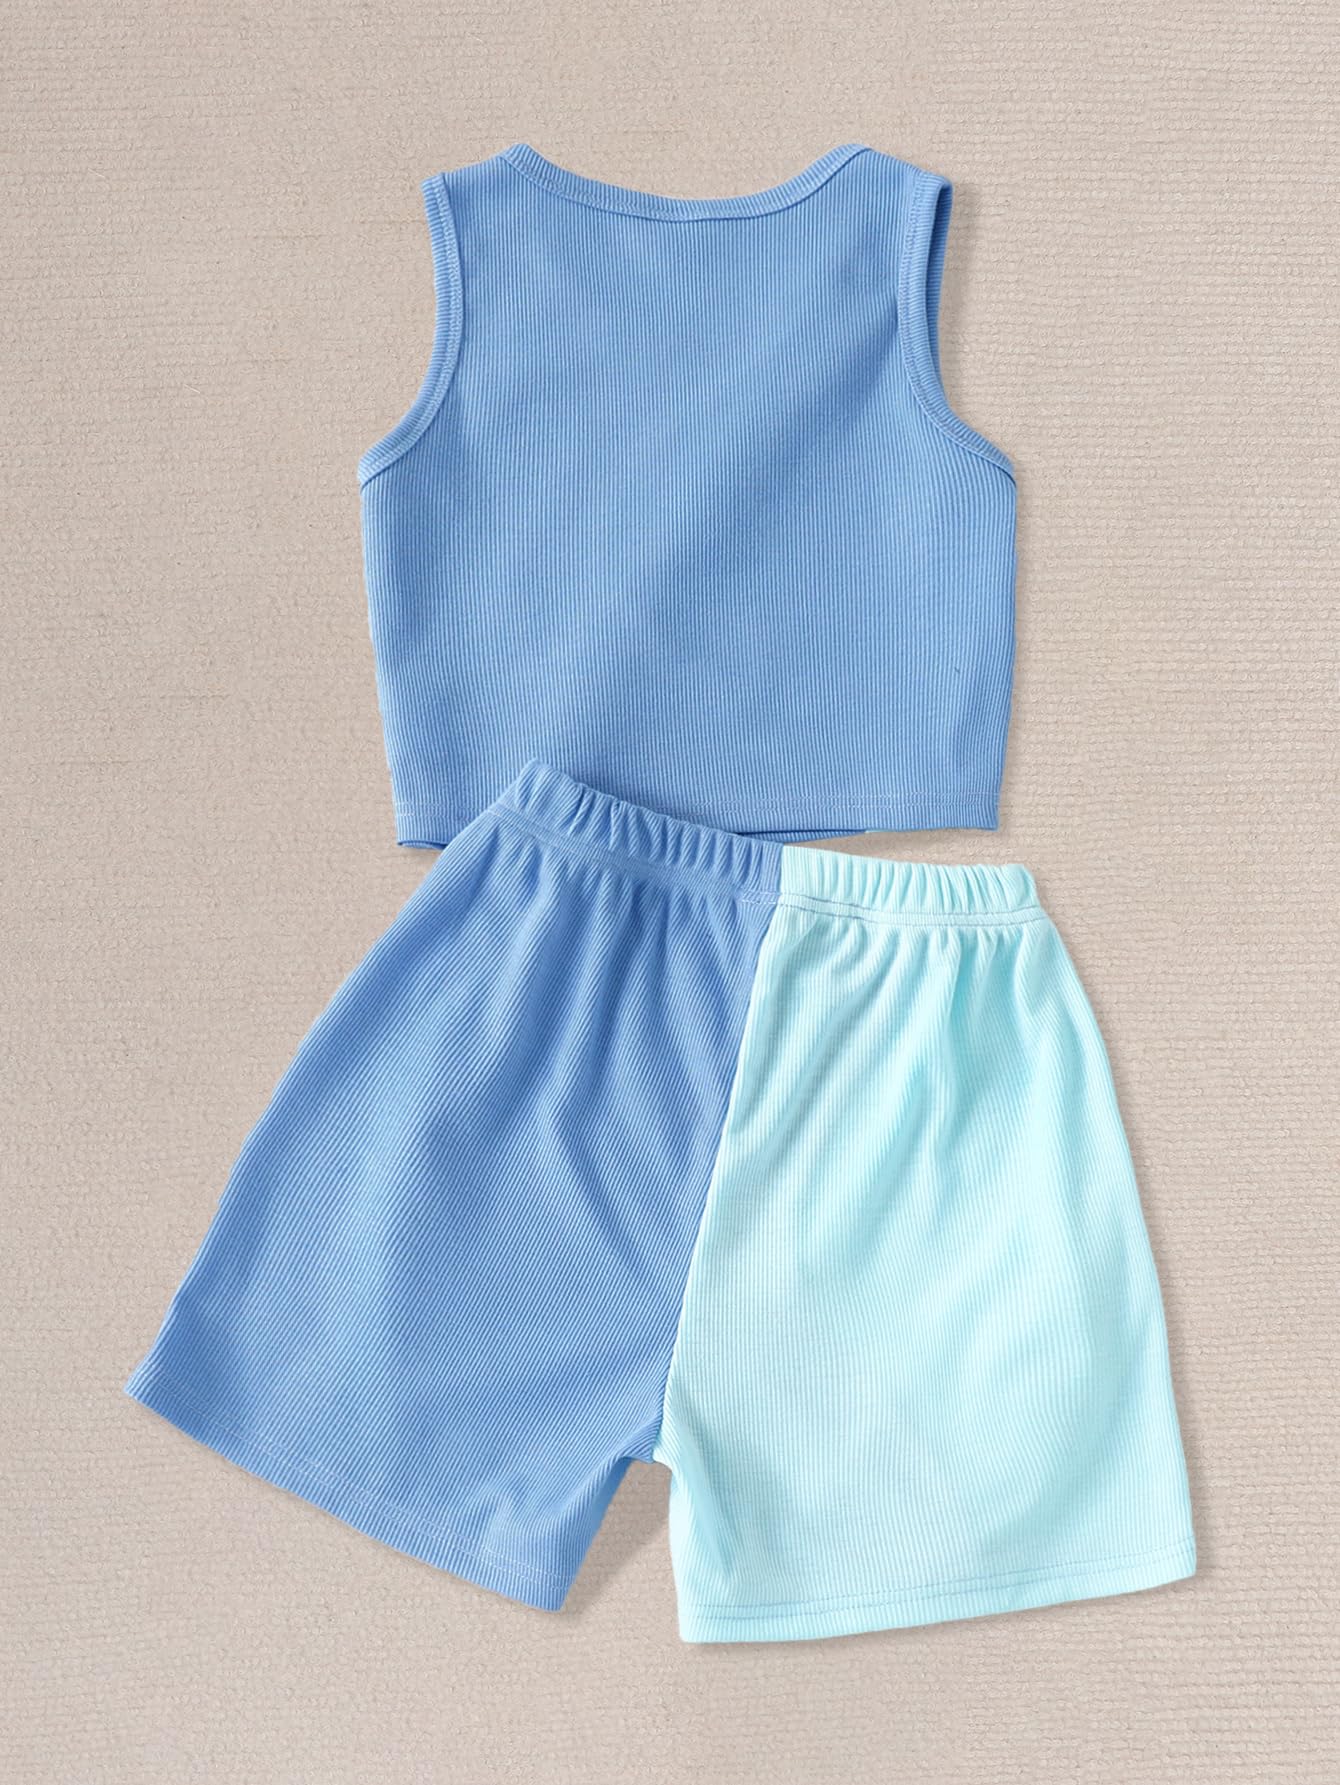 Verdusa Girl's 2 Piece Workout Outfit Colorblock Crop Tank Top and Short Sets Blue 9Y